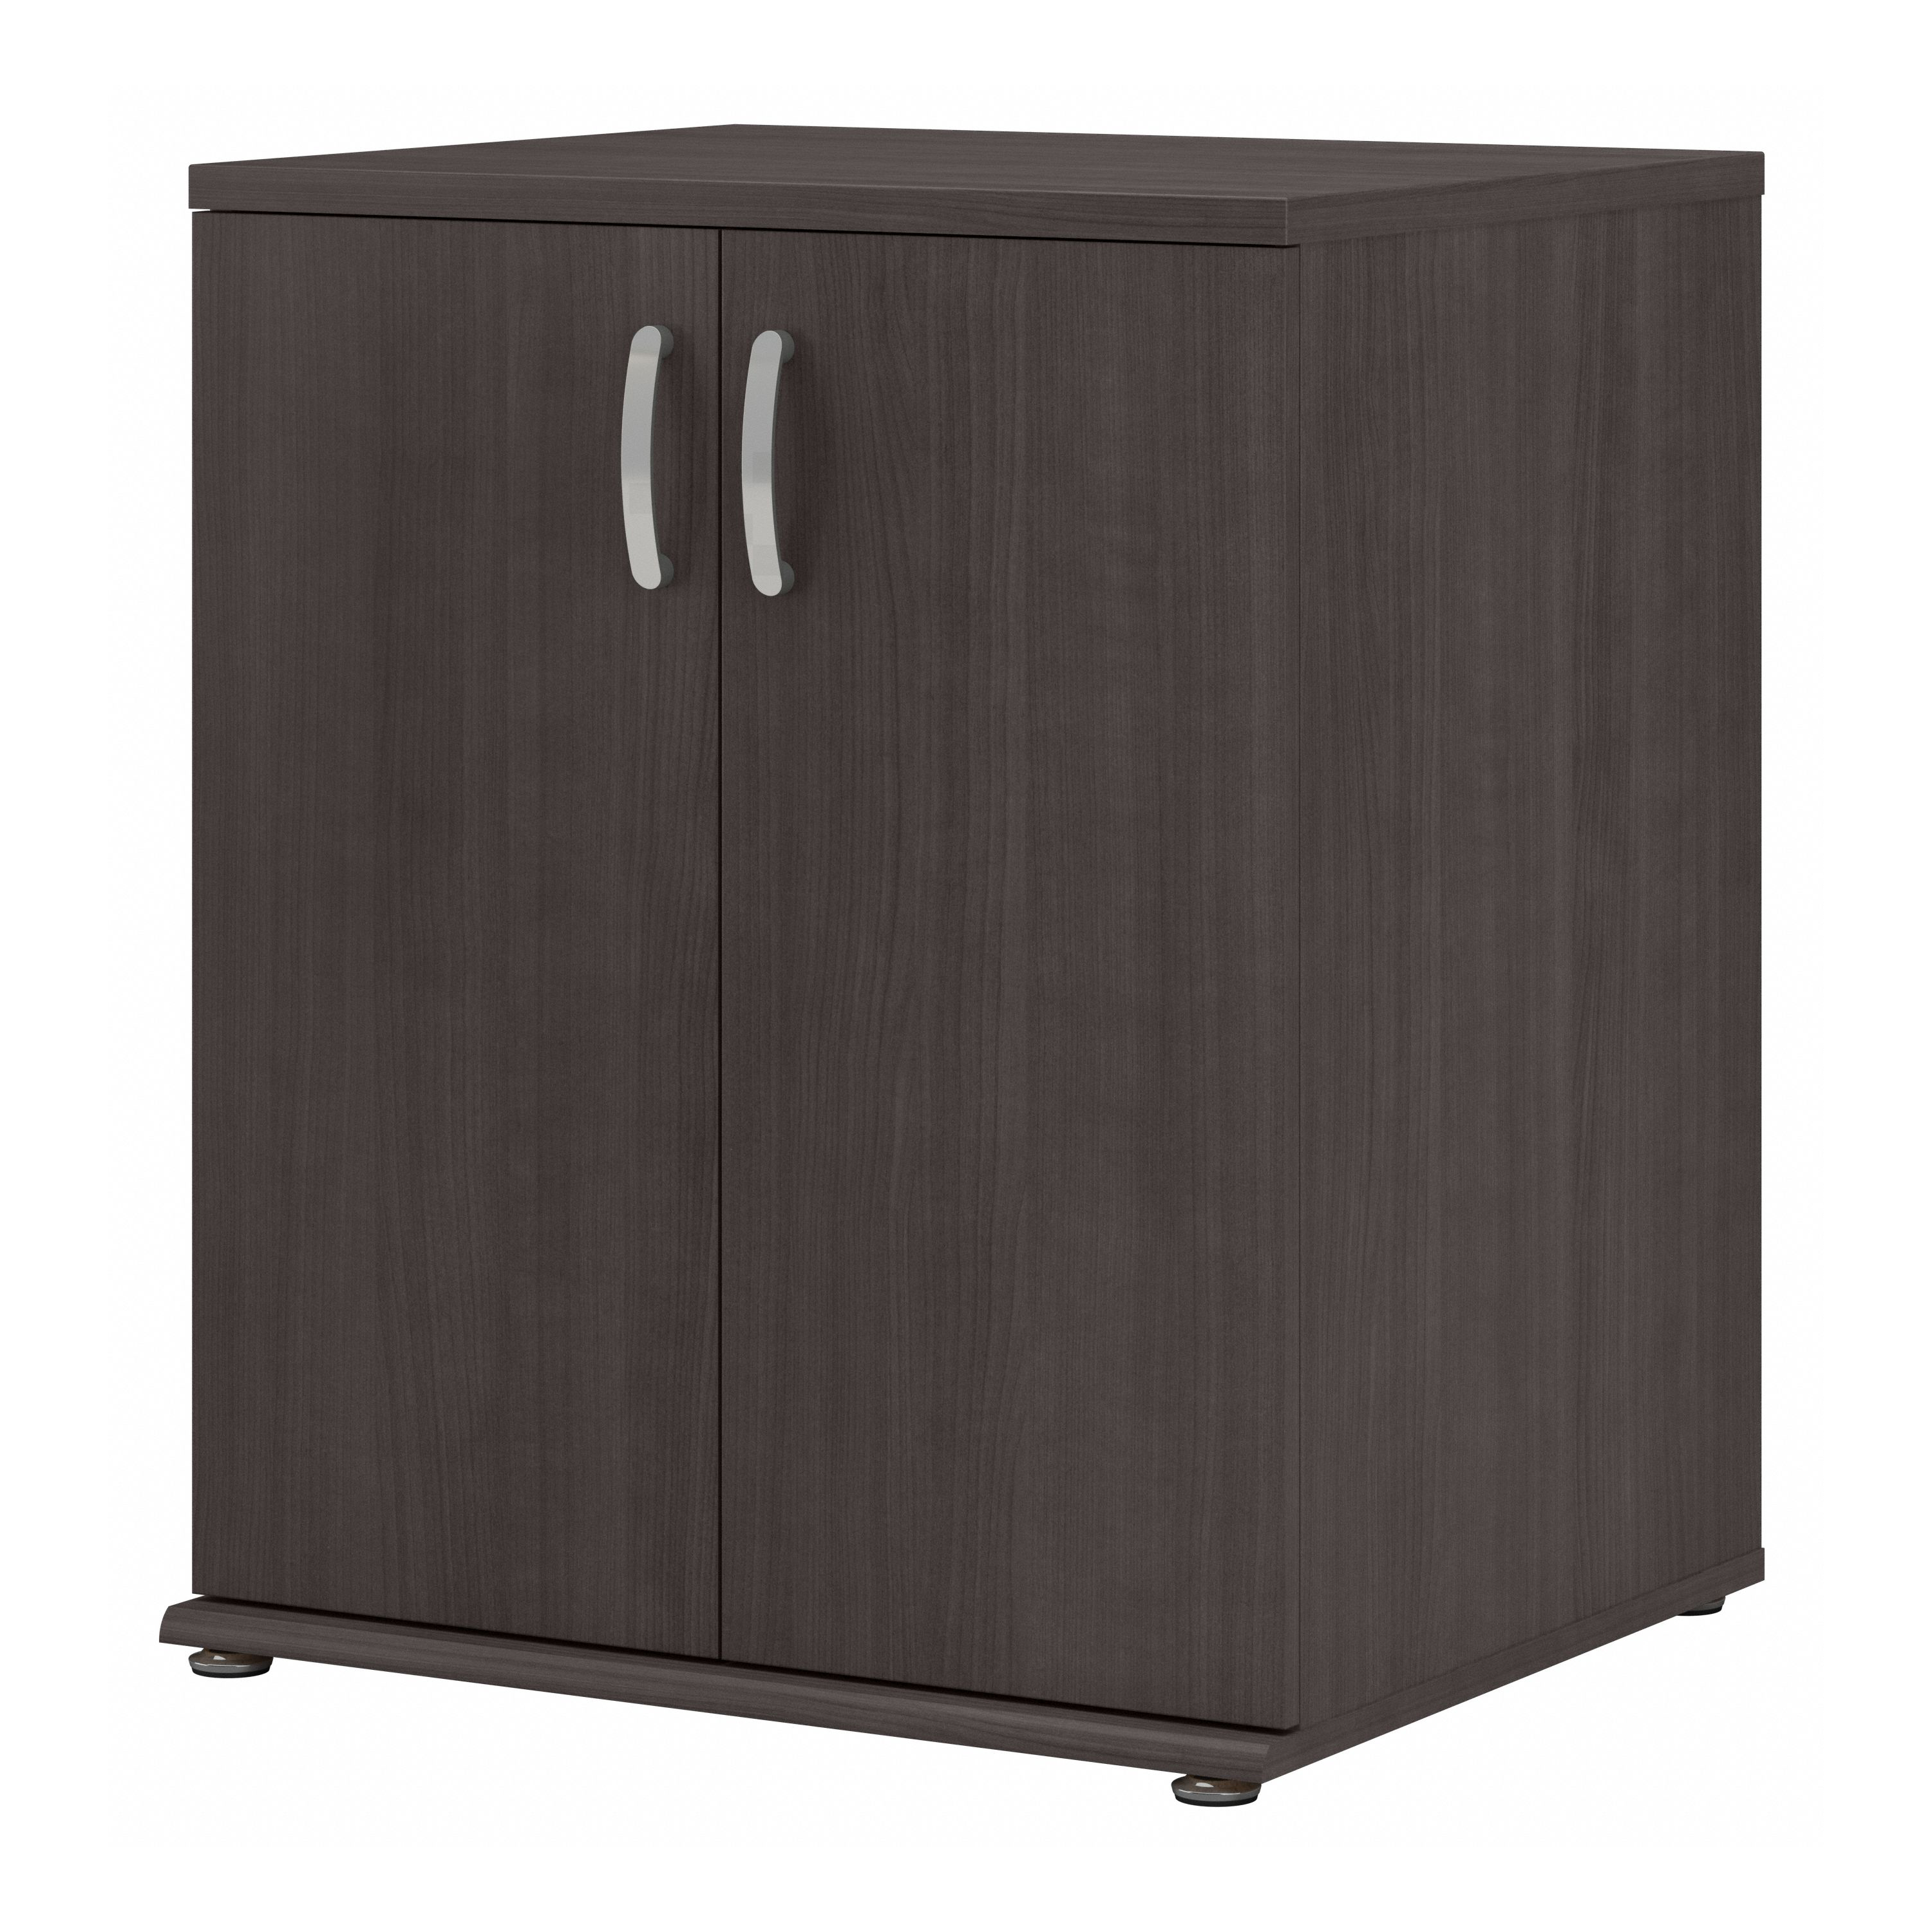 Shop Bush Business Furniture Universal Laundry Room Storage Cabinet with Doors and Shelves 02 LNS128SG-Z #color_storm gray